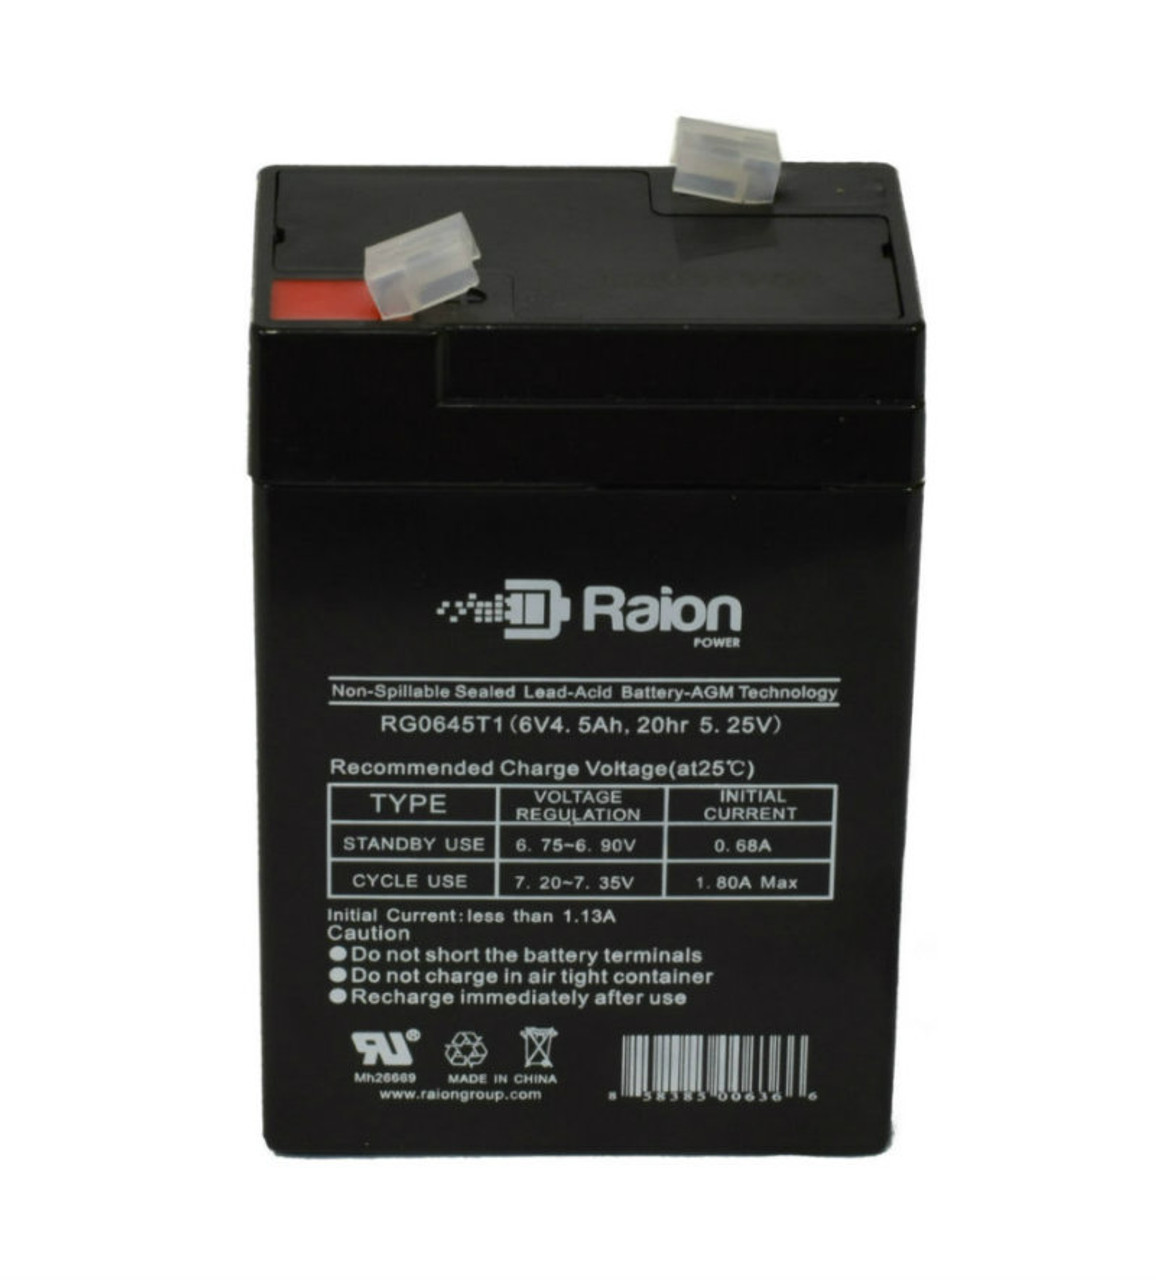 Raion Power RG0645T1 Replacement Battery Cartridge for Sheng Yang SY650